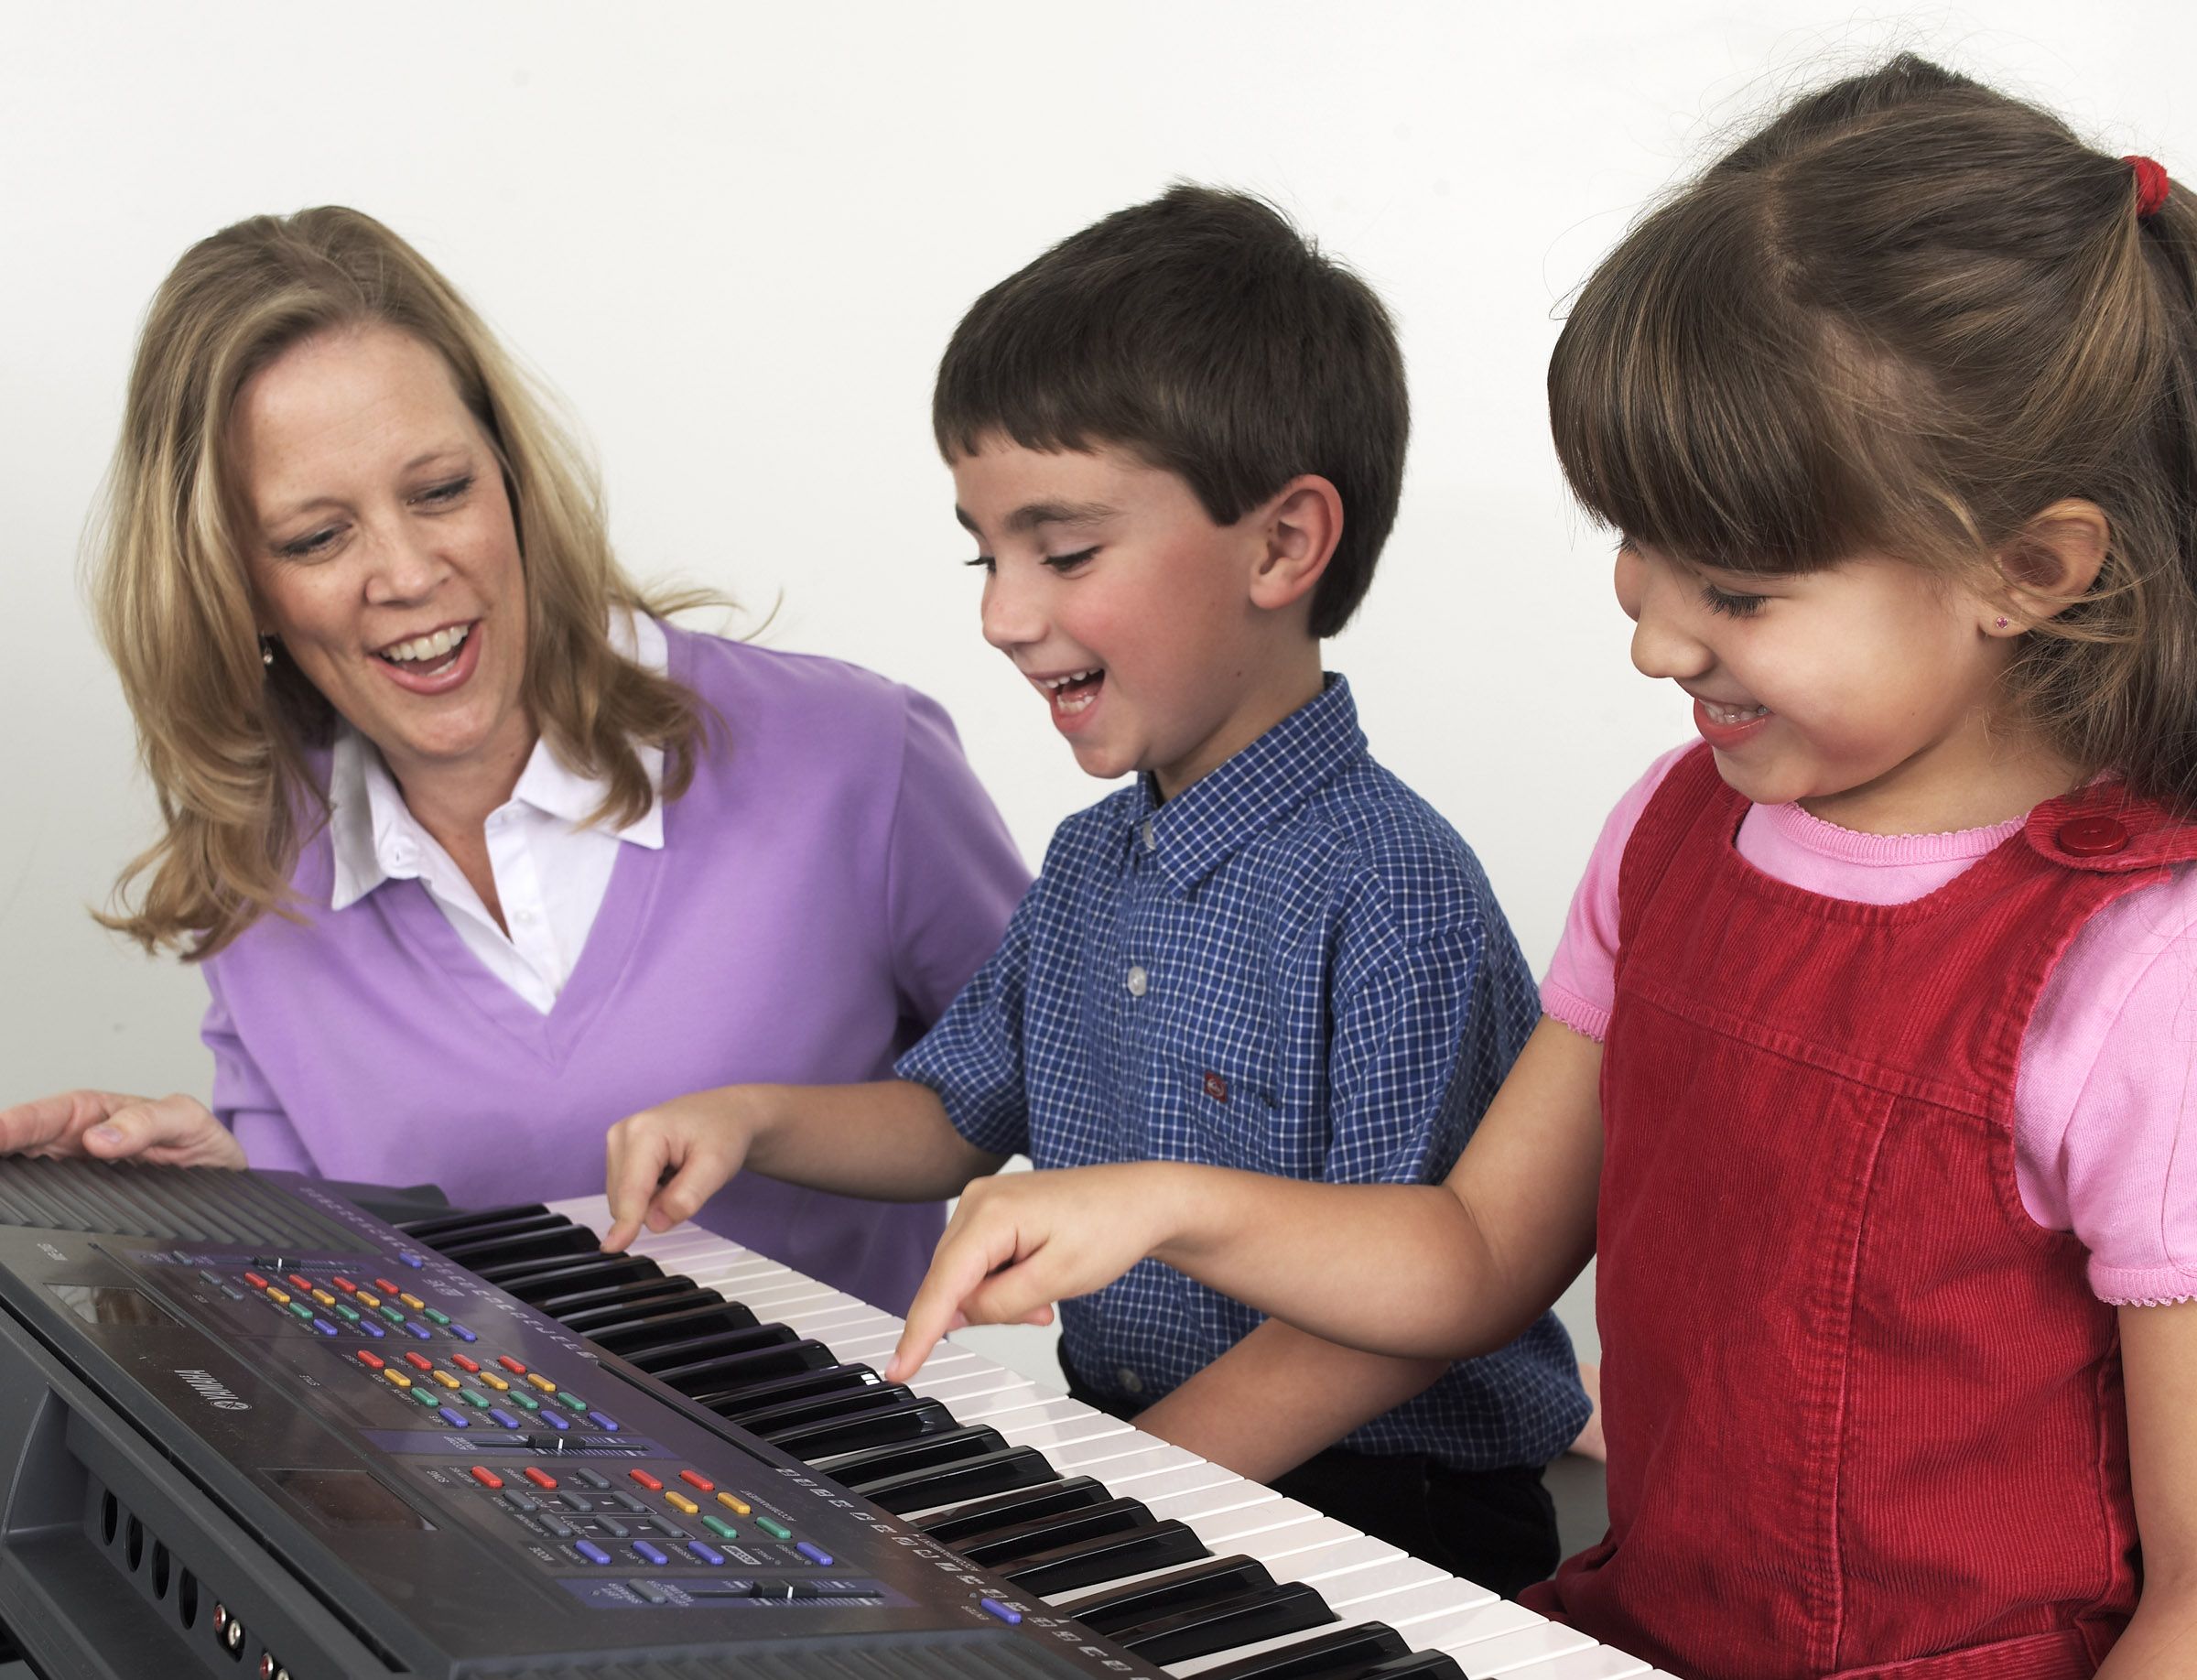 Woman watches as two young children play the keyboard.